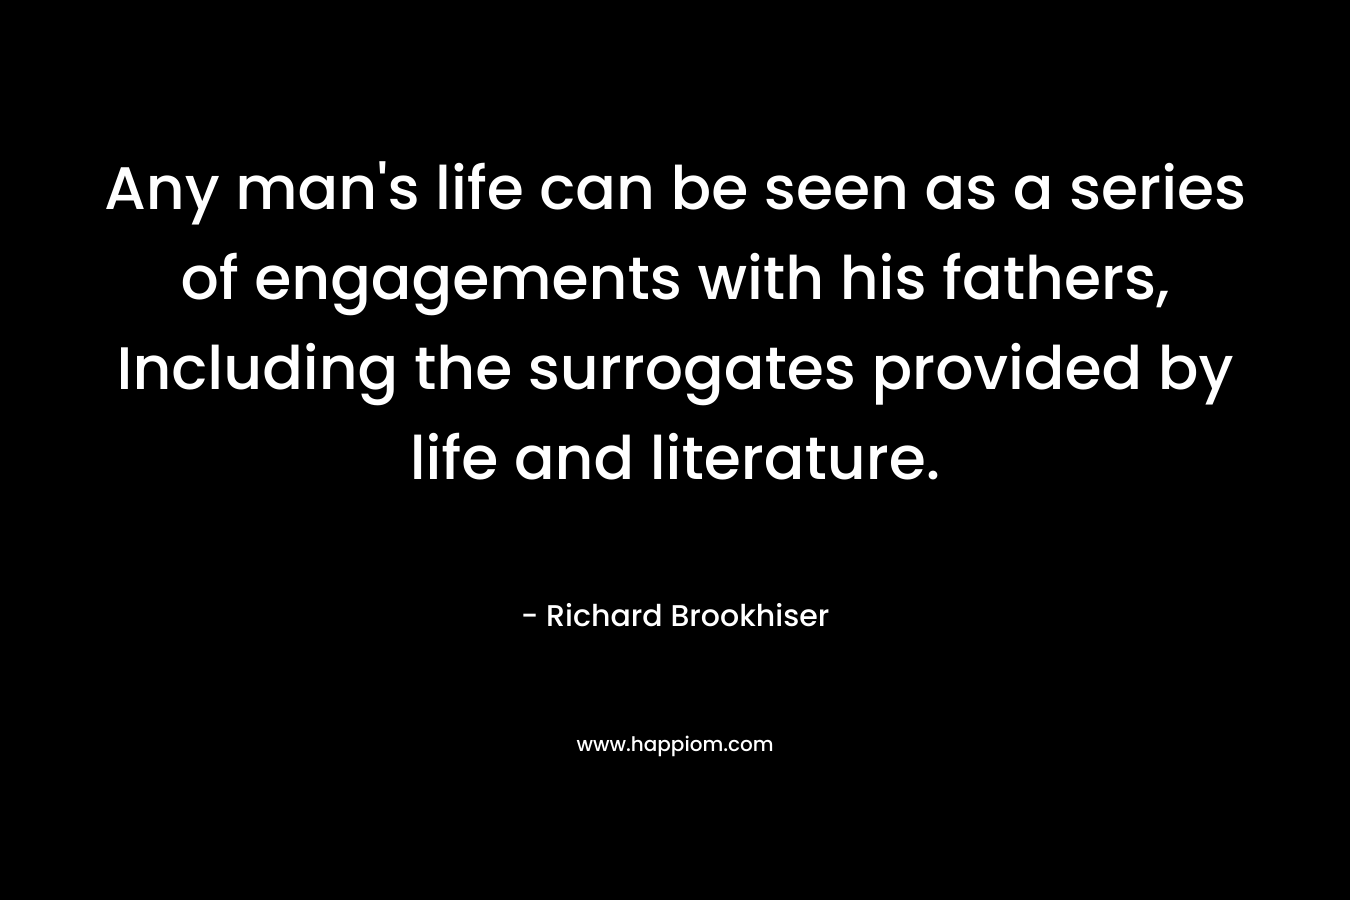 Any man’s life can be seen as a series of engagements with his fathers, Including the surrogates provided by life and literature. – Richard Brookhiser